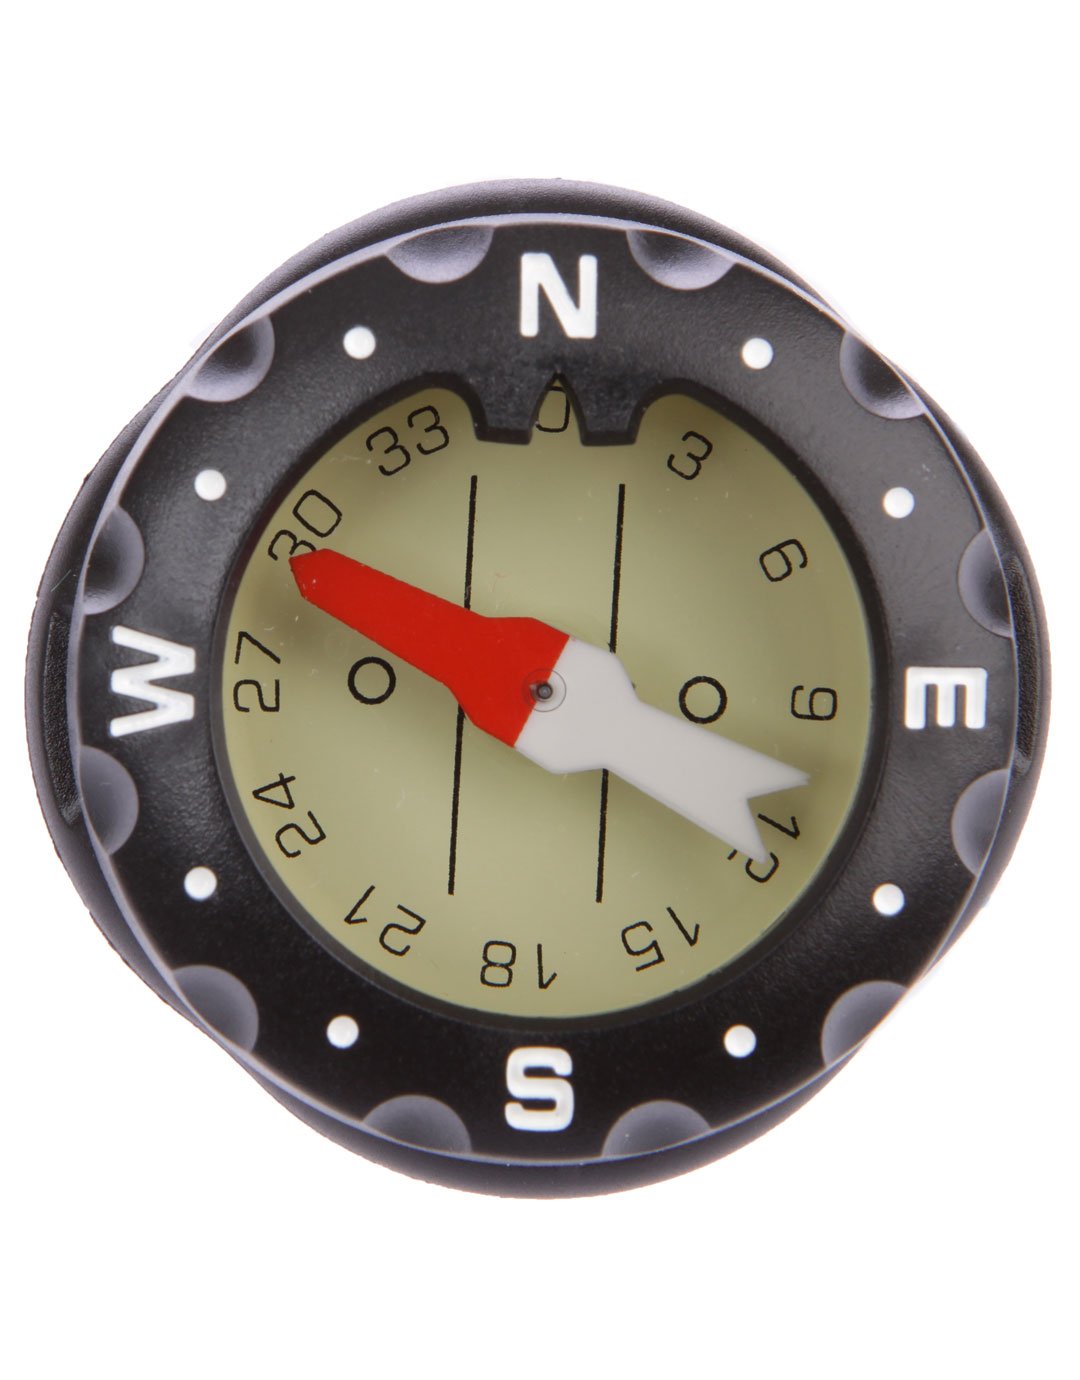 Image of C1 Compass for Strap Mounting